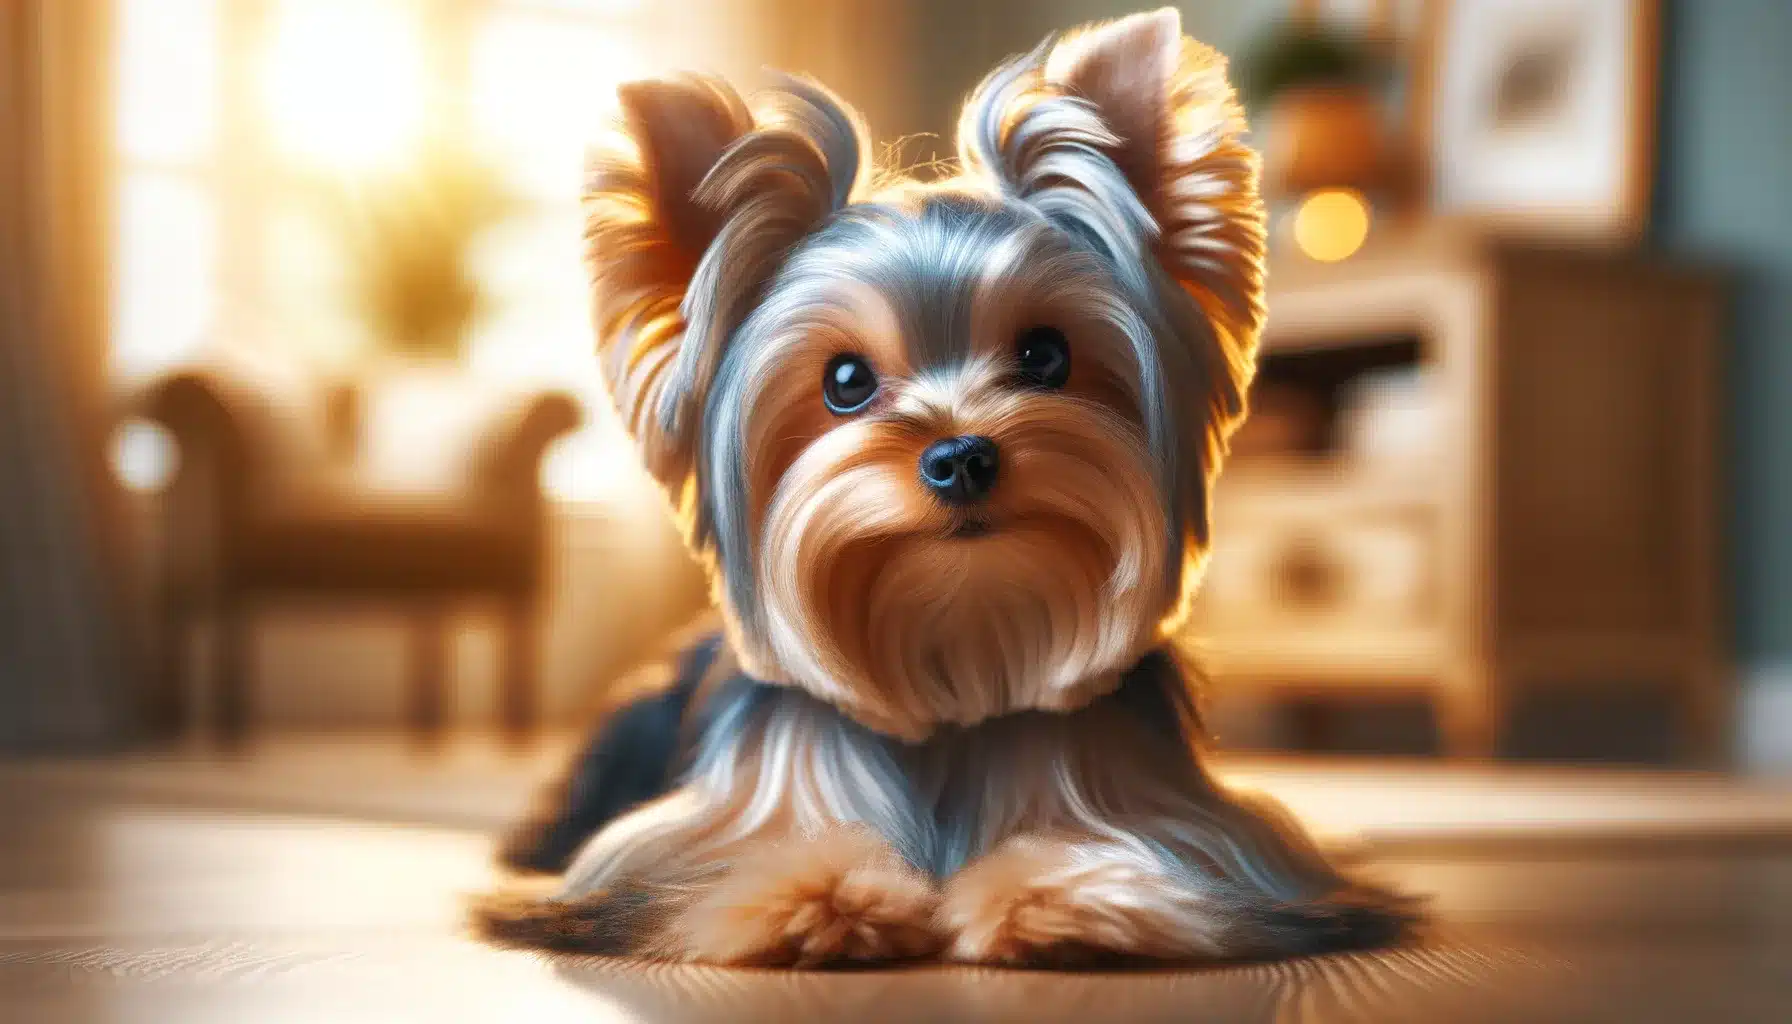 A playful Yorkie with a shiny coat and bright, curious eyes, standing alert in a grassy field.